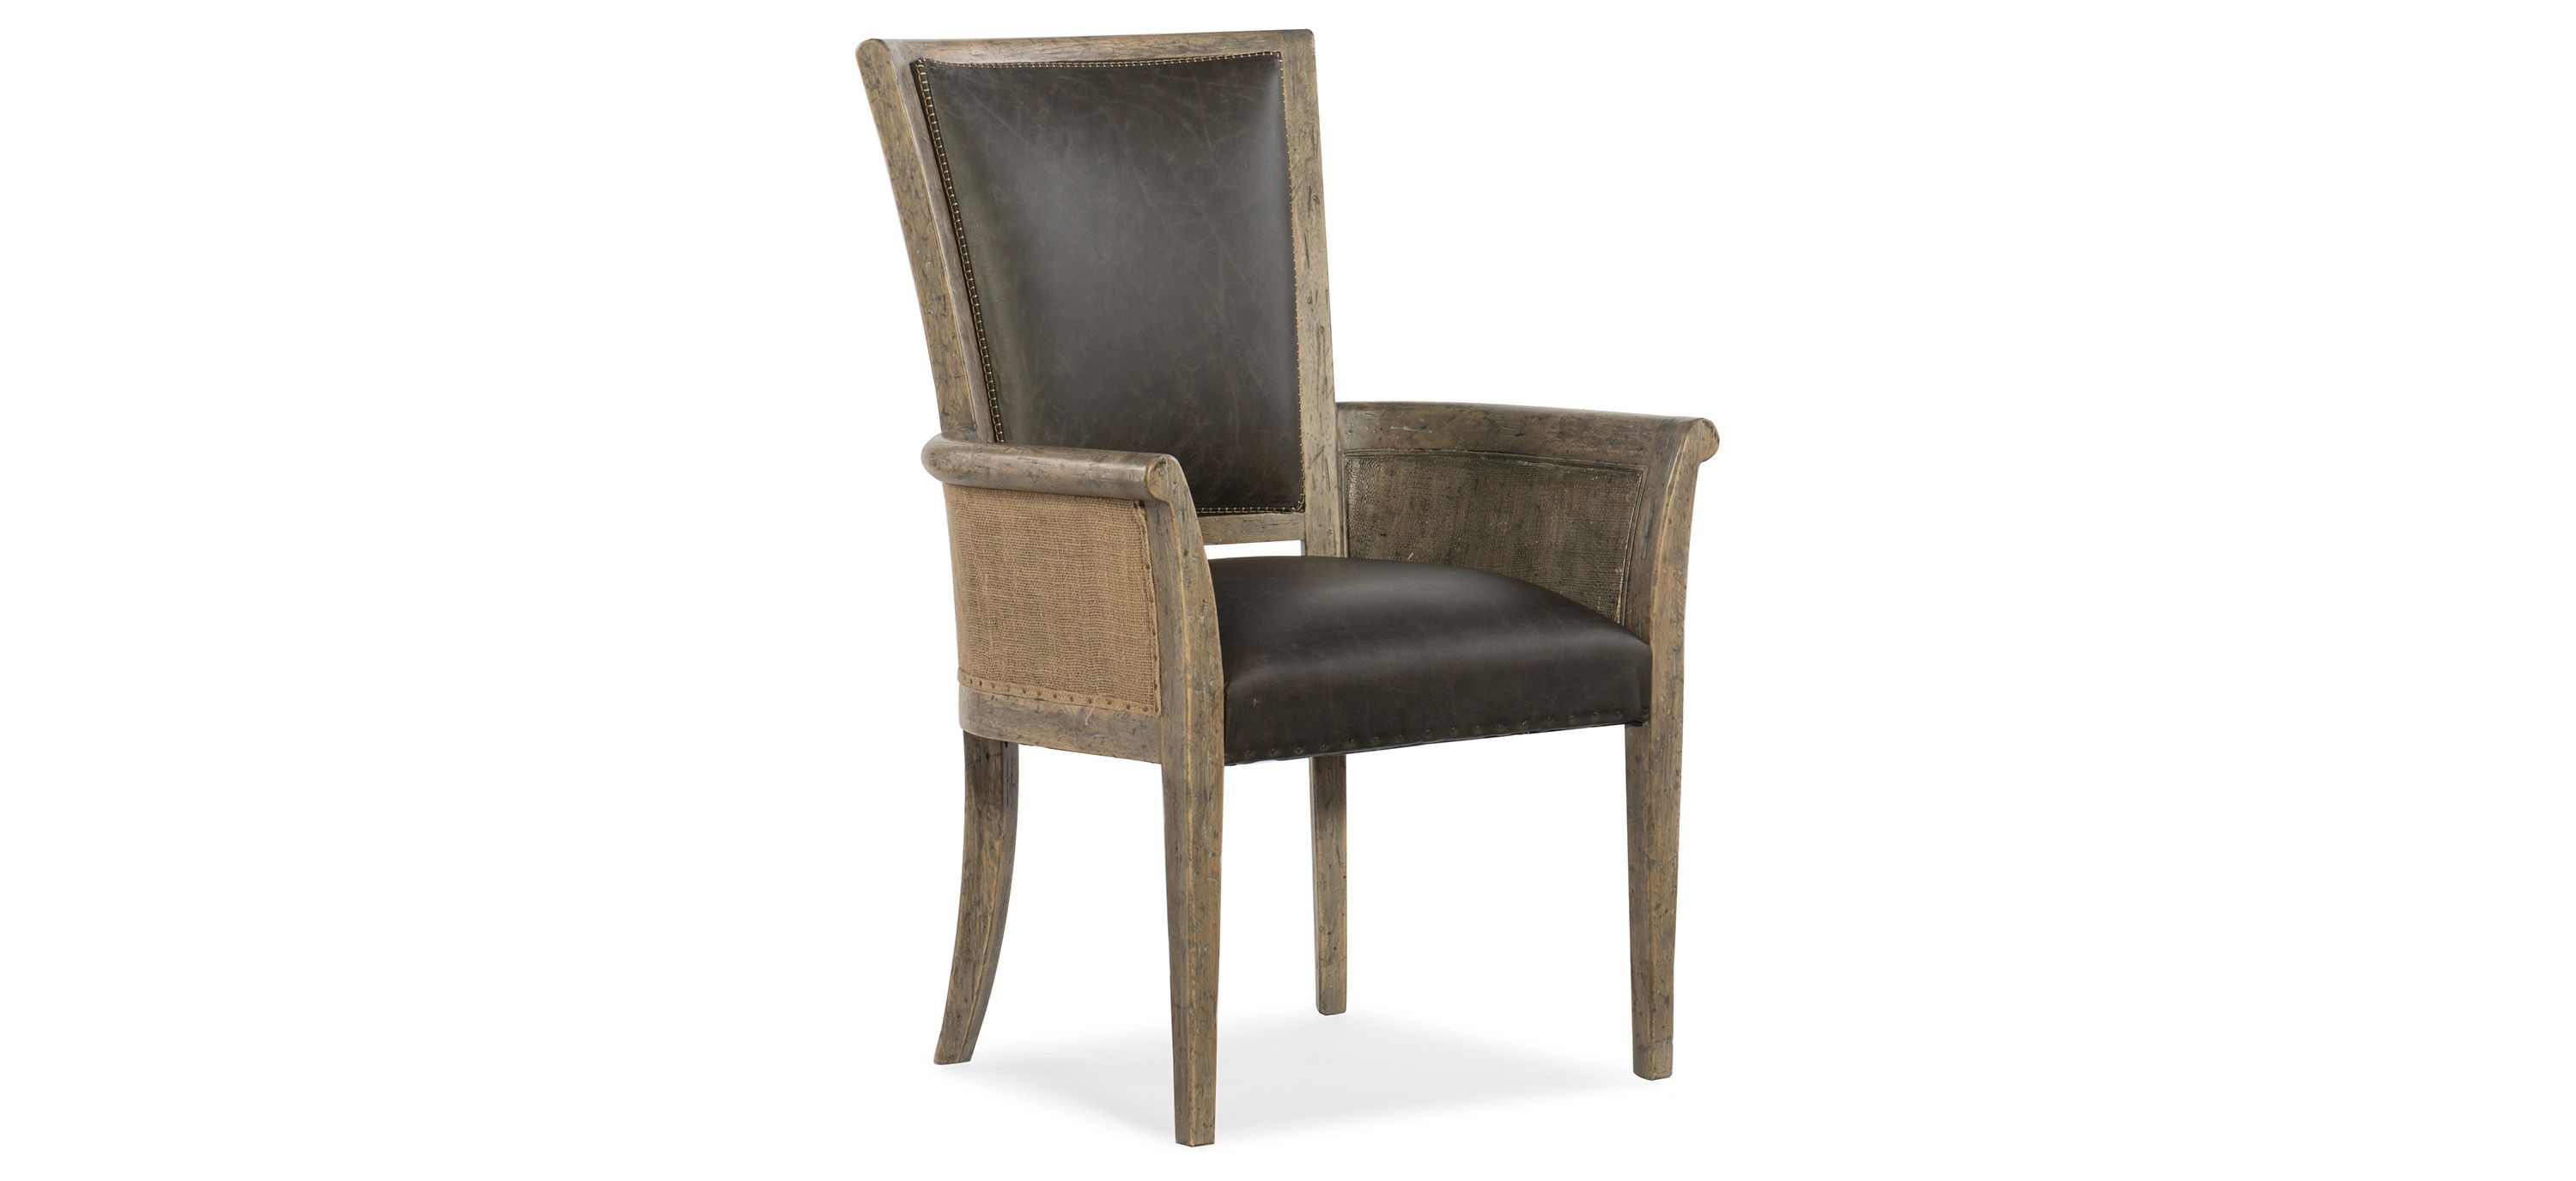 Beaumont Host Chair - Set of 2